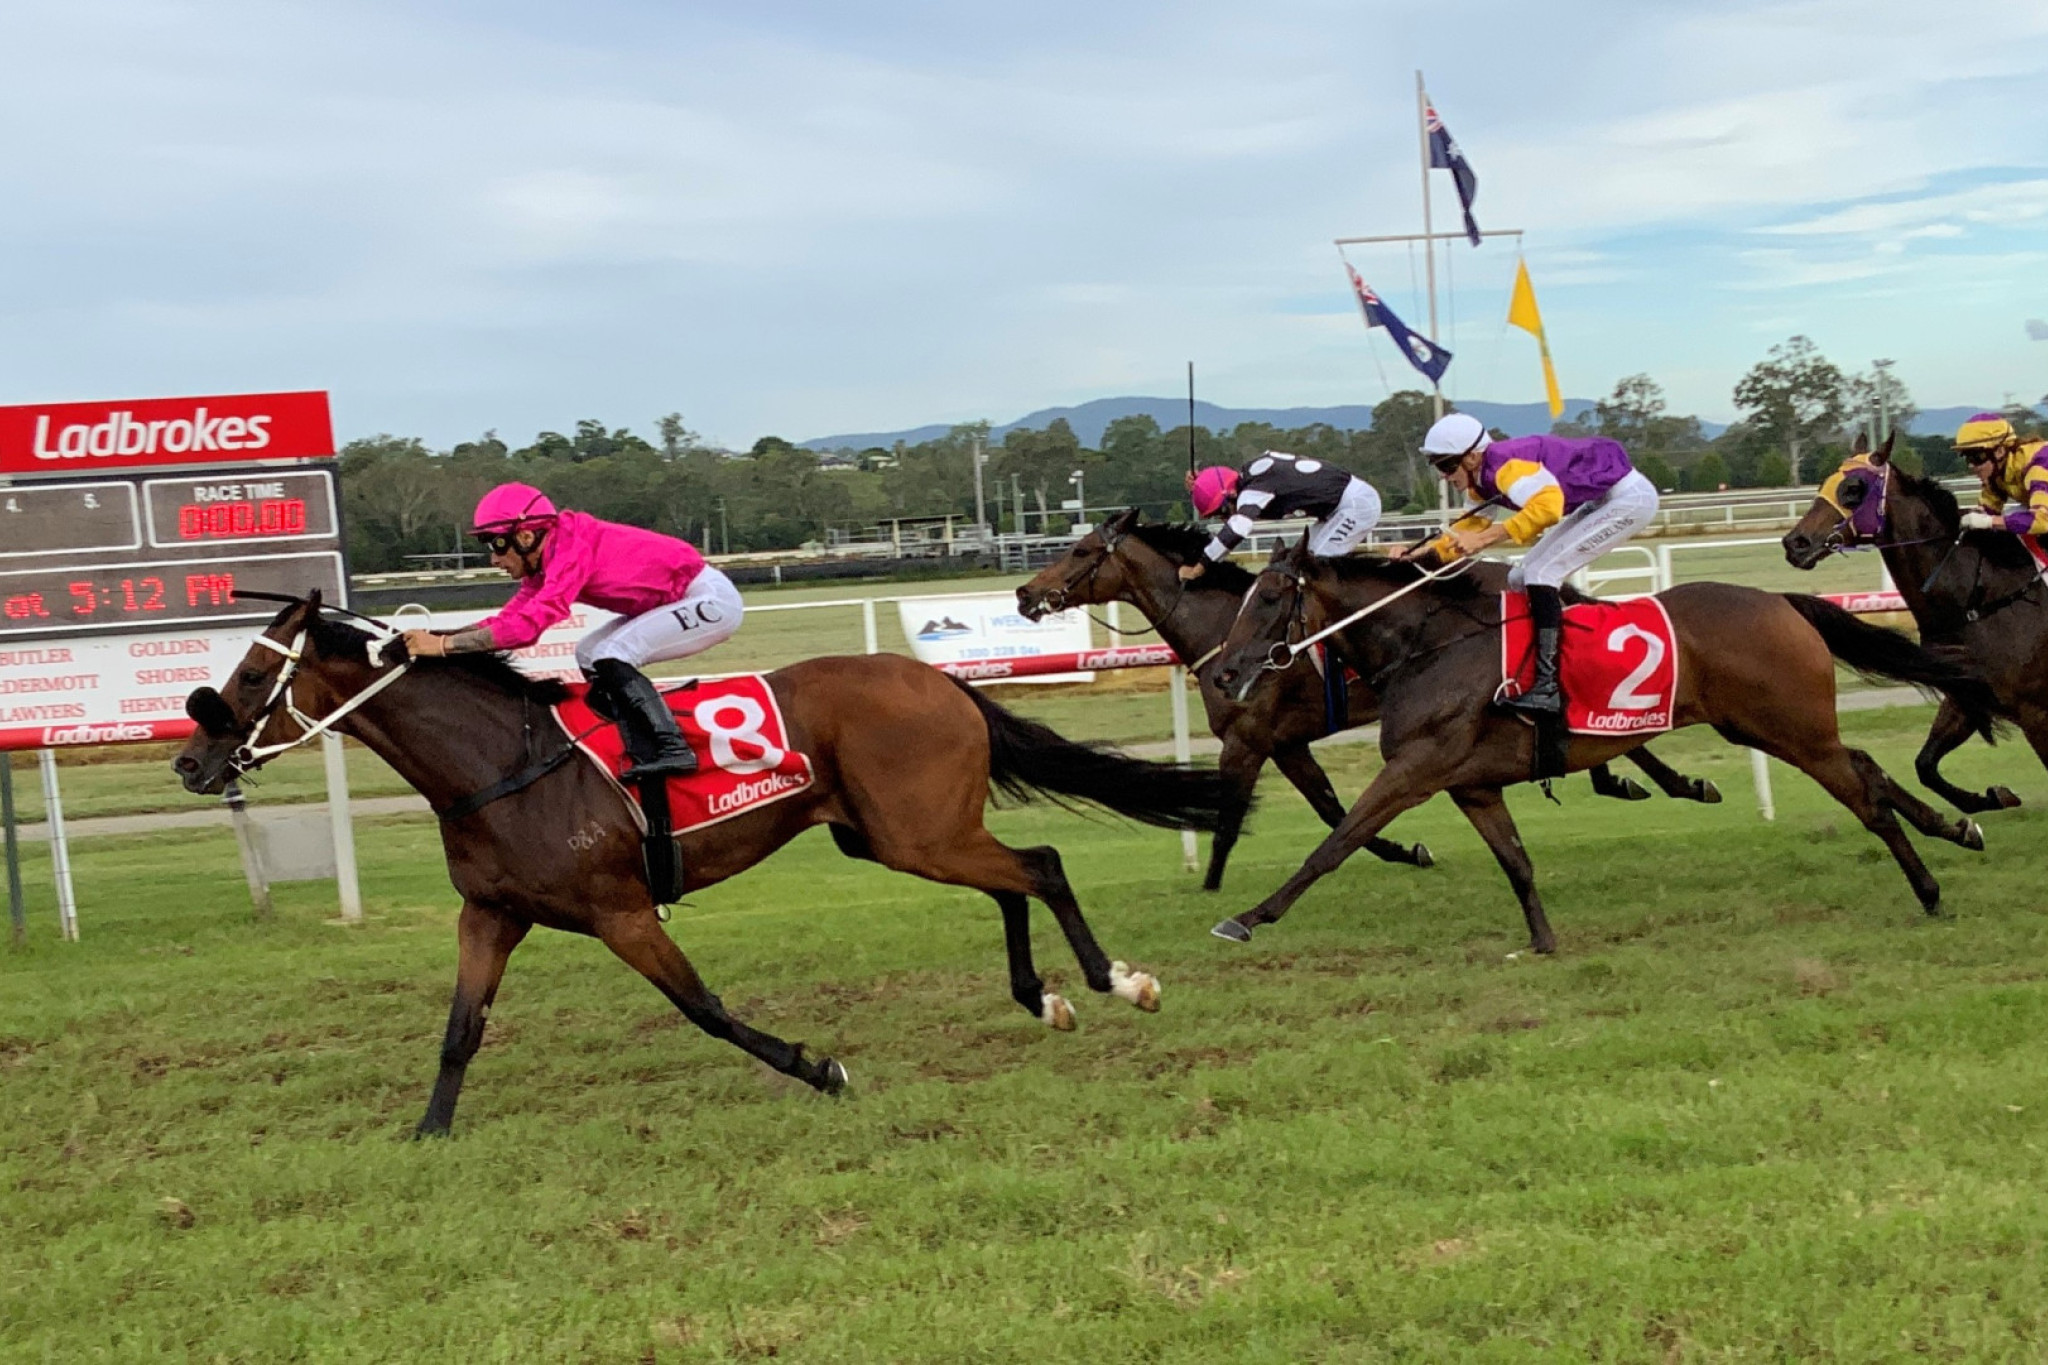 Elione Chaves rides Constant Cafe to victory in the eighth race at Kilcoy. It was one of two victories for Chaves, along with trainer Paula Barron.